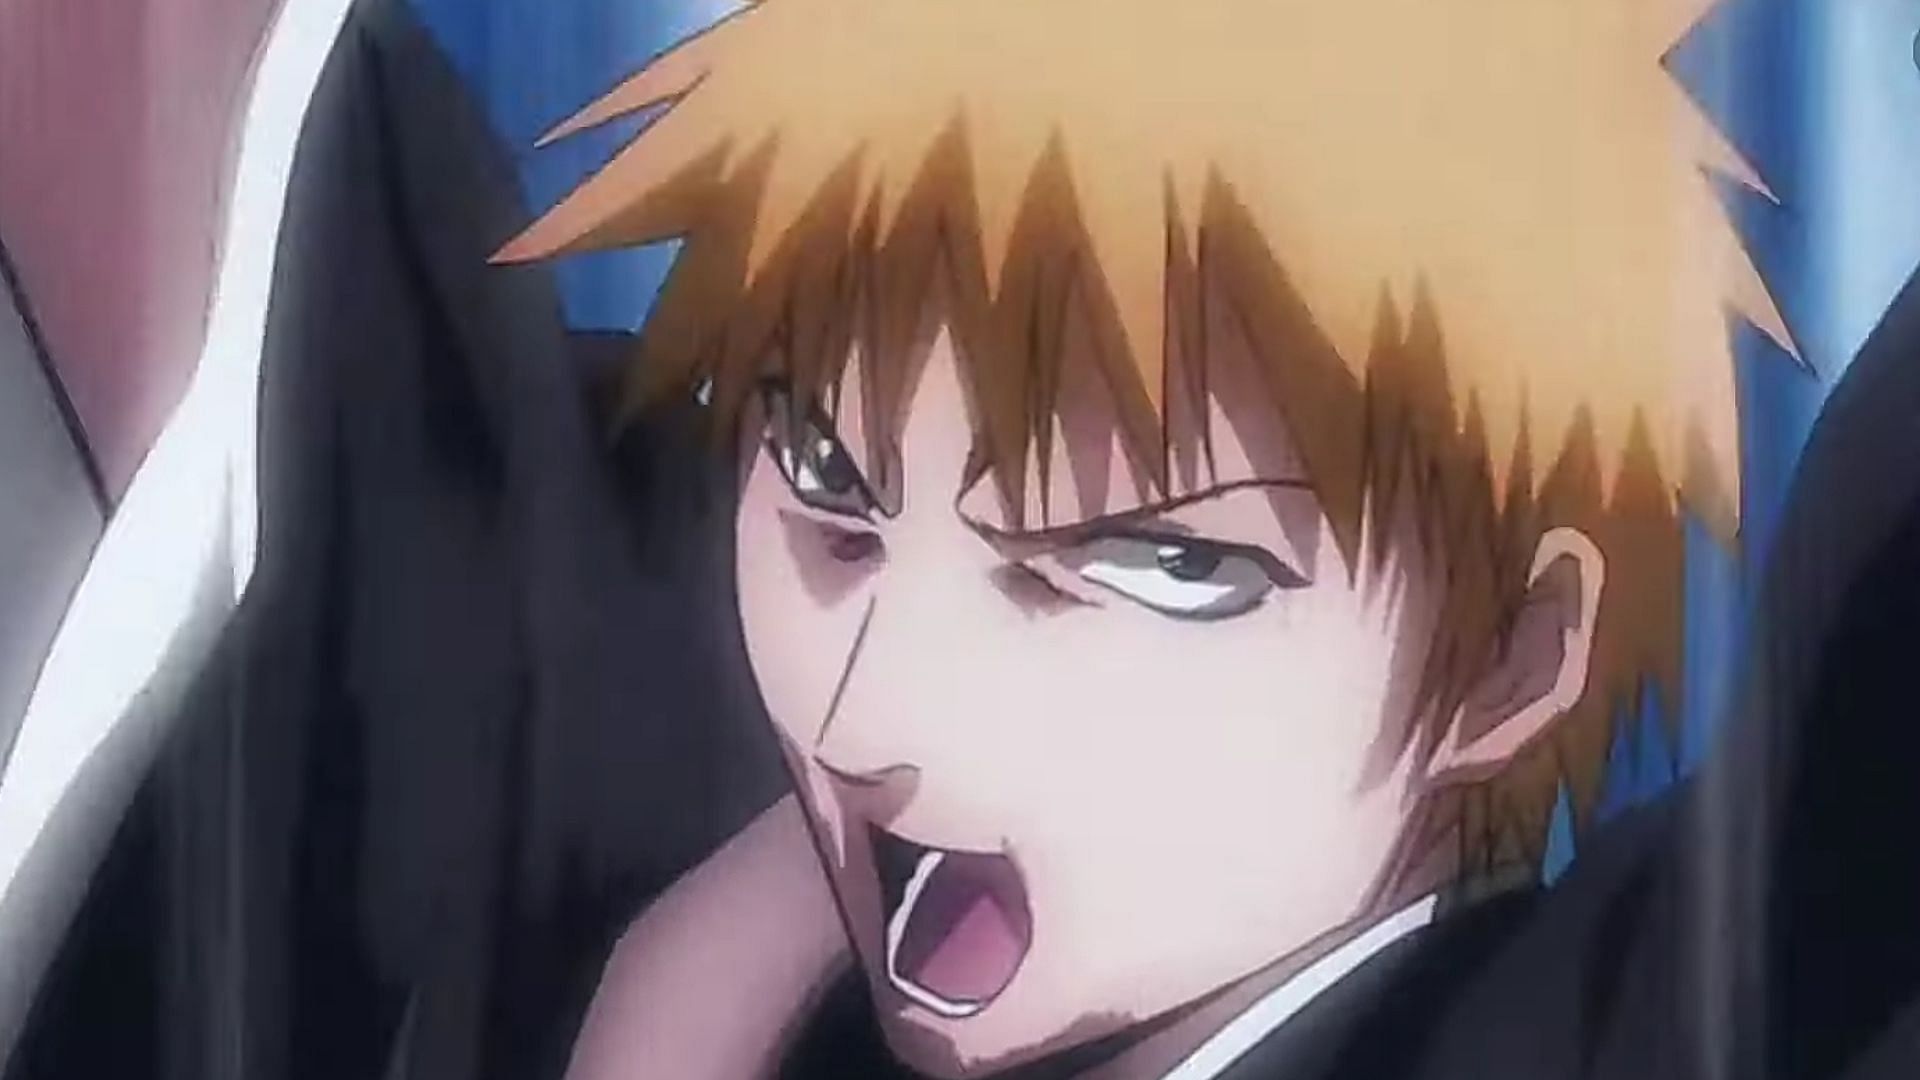 ichigo turns into a vastro lorde for the first time 